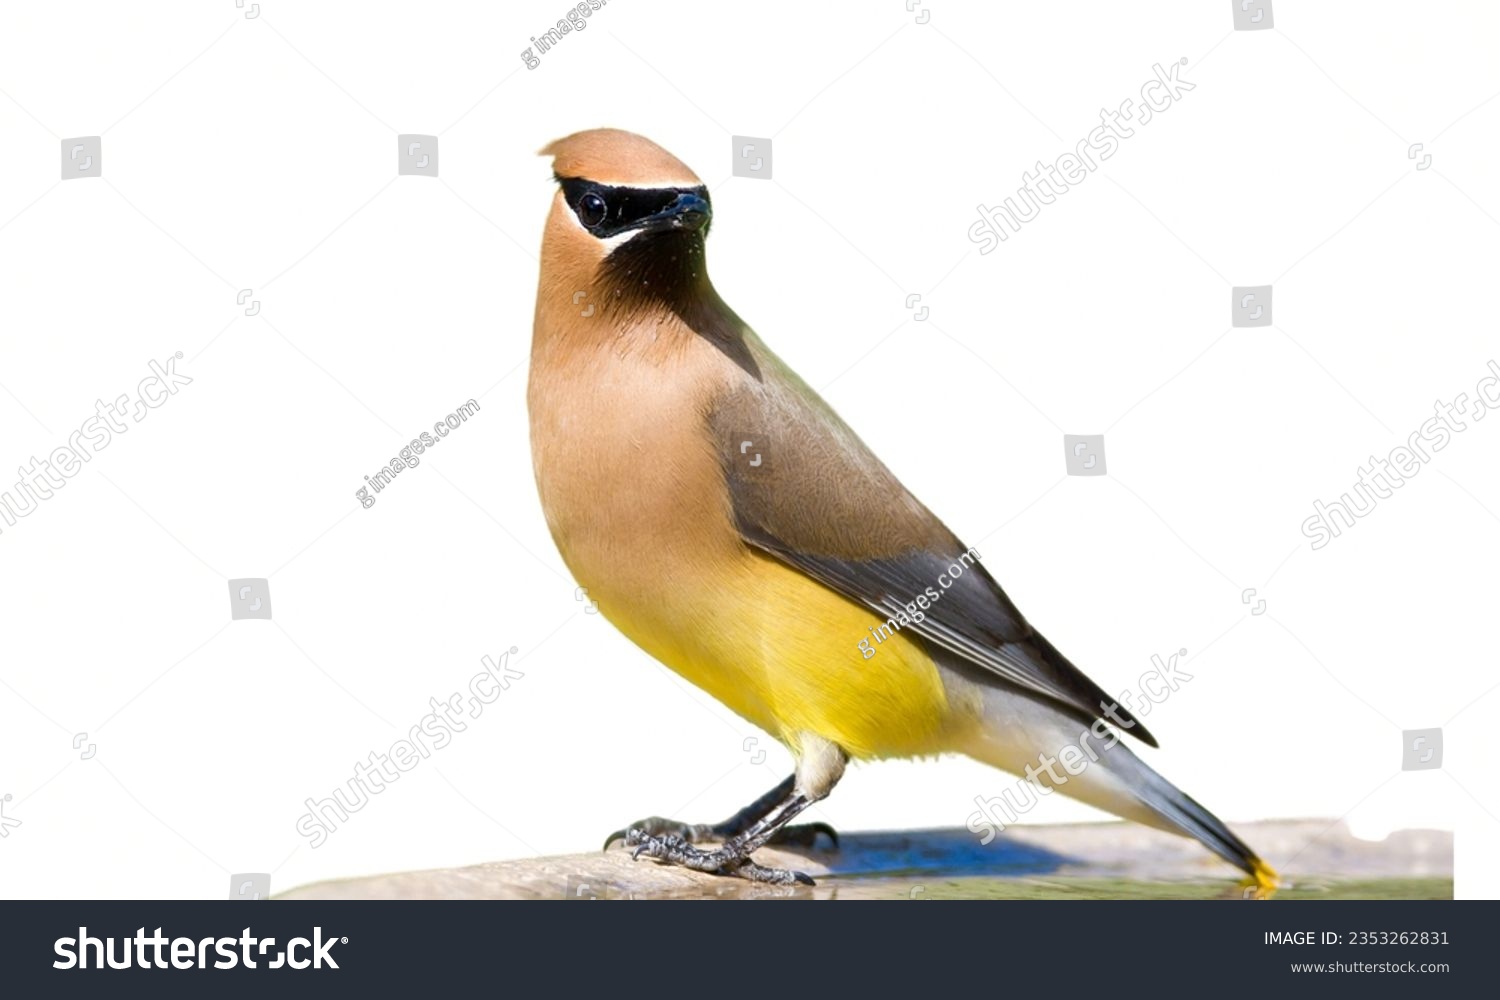 Cedar Waxwing: Sleek brown bird with a crest and yellow tips on its tail feathers. #2353262831